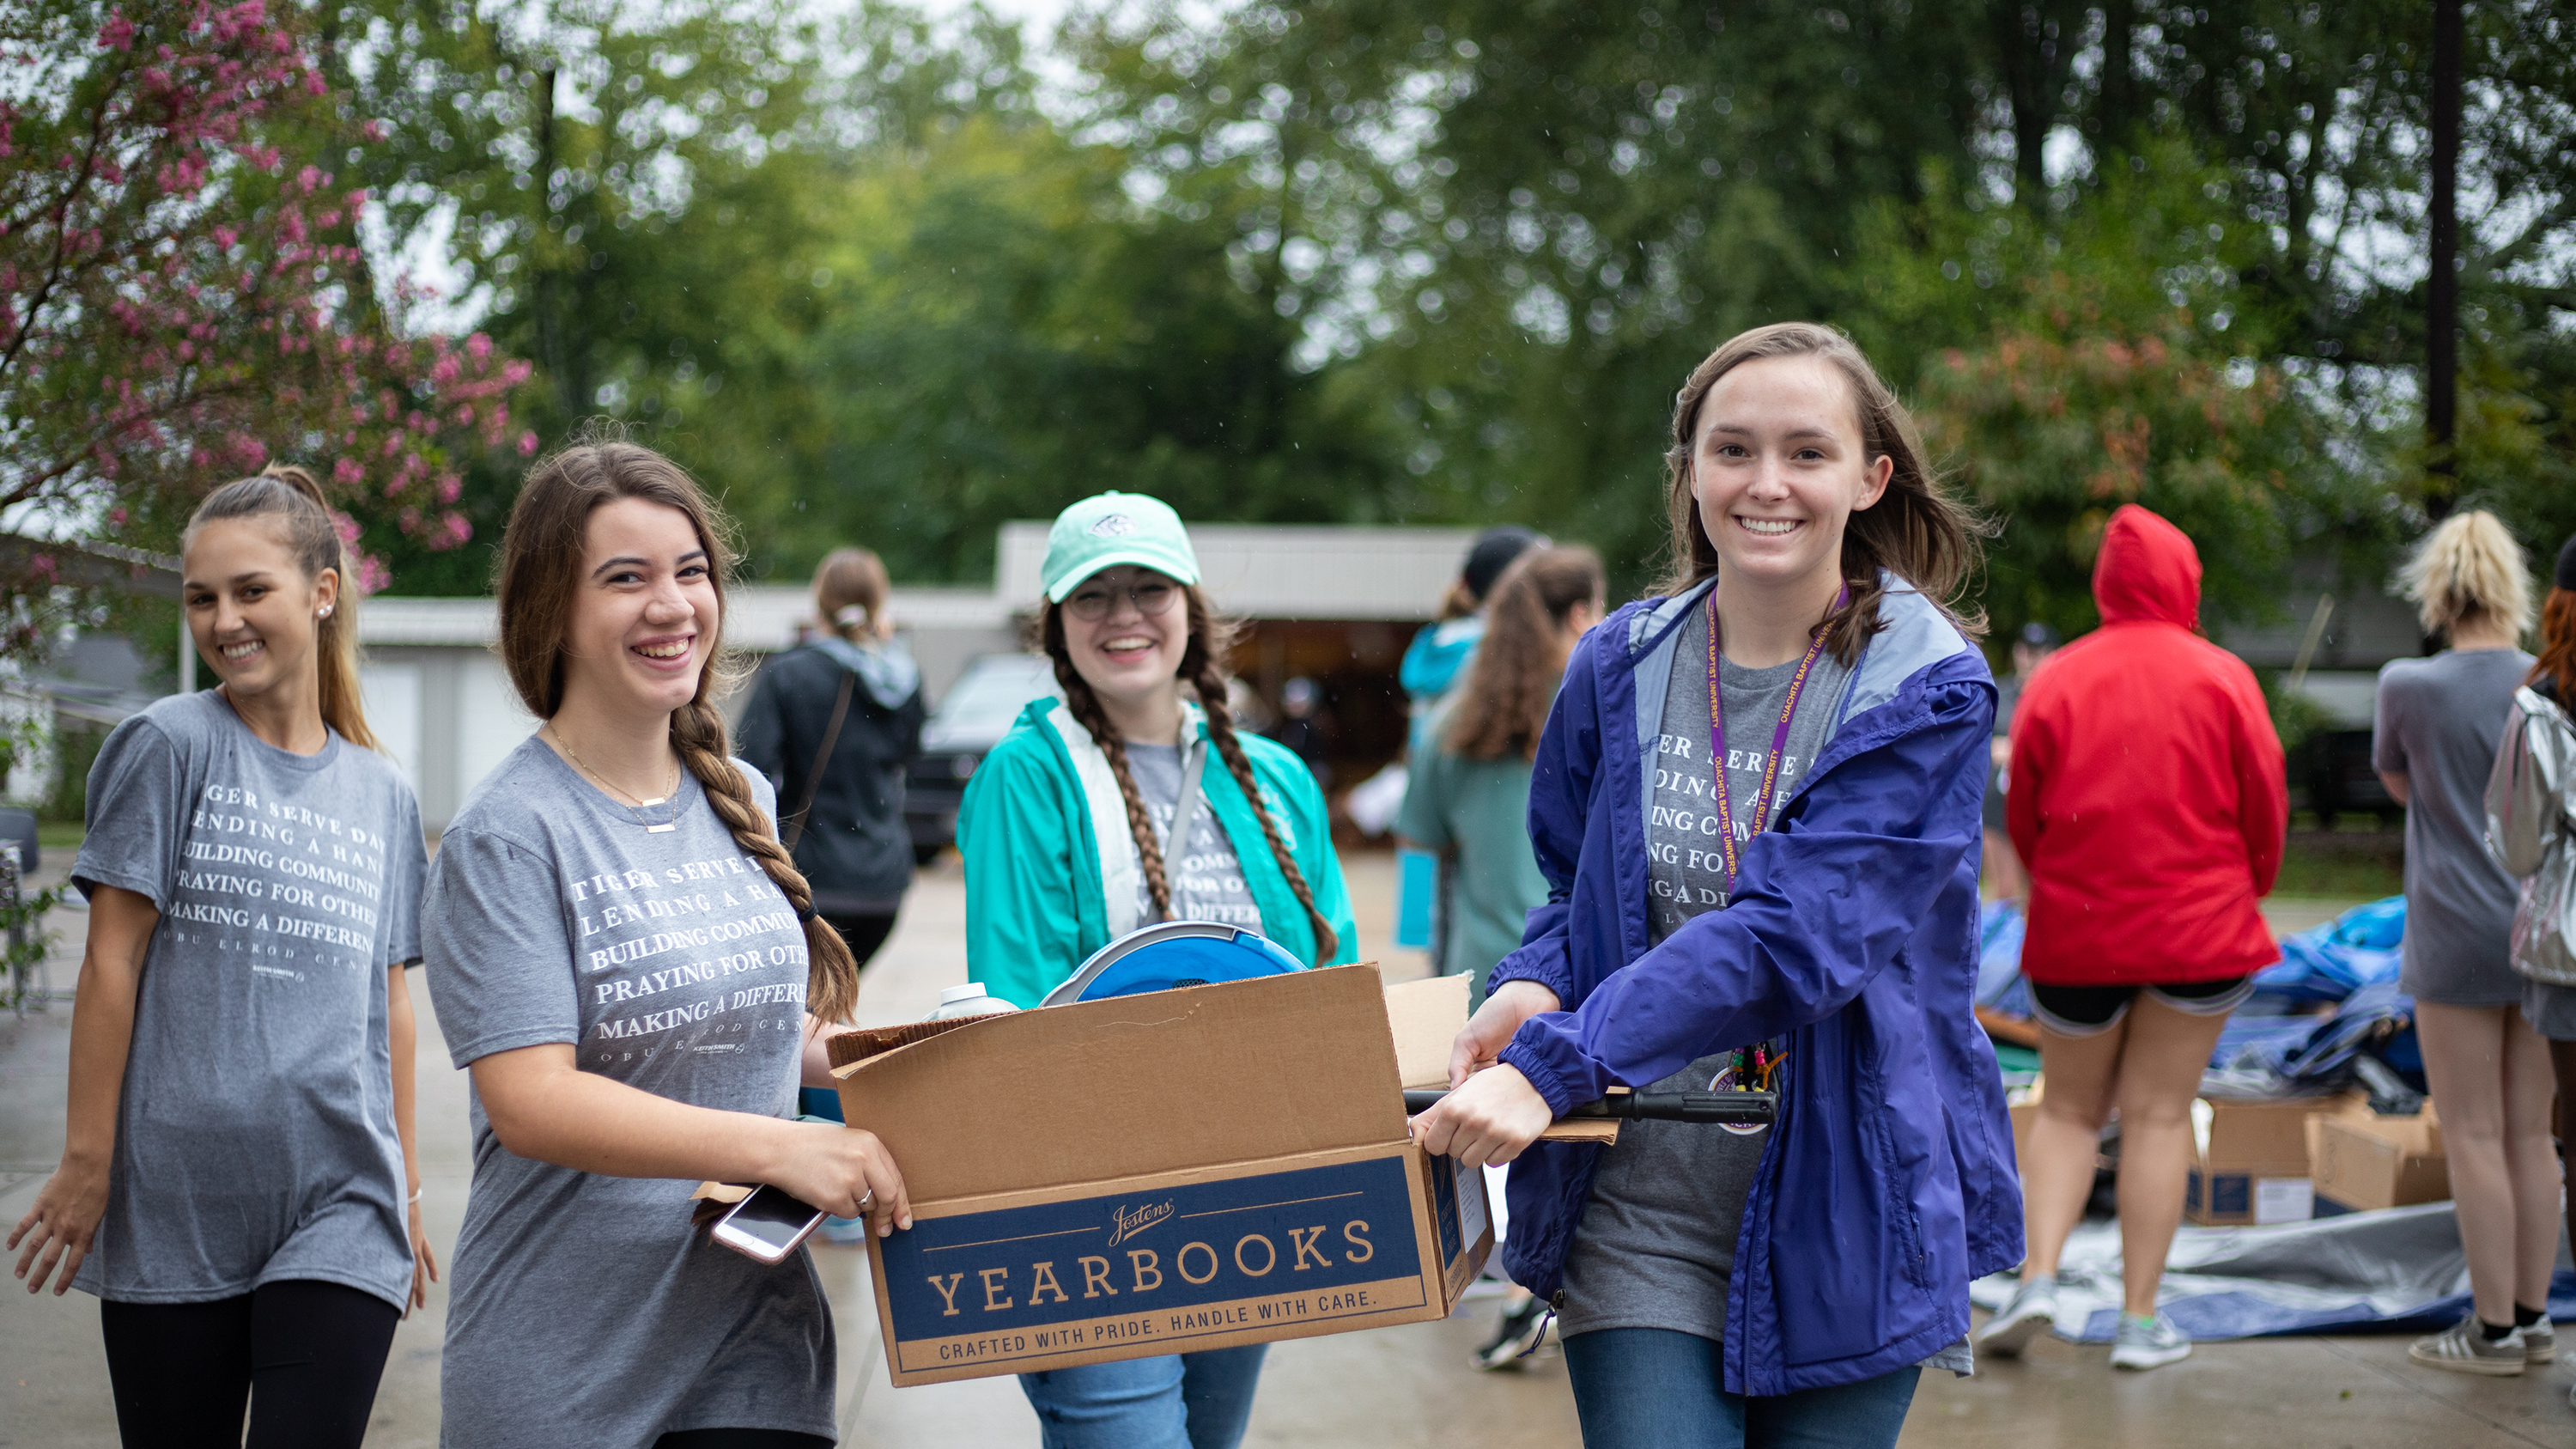 More than 770 Ouachitonians serve on Fall 2018 Tiger Serve Day